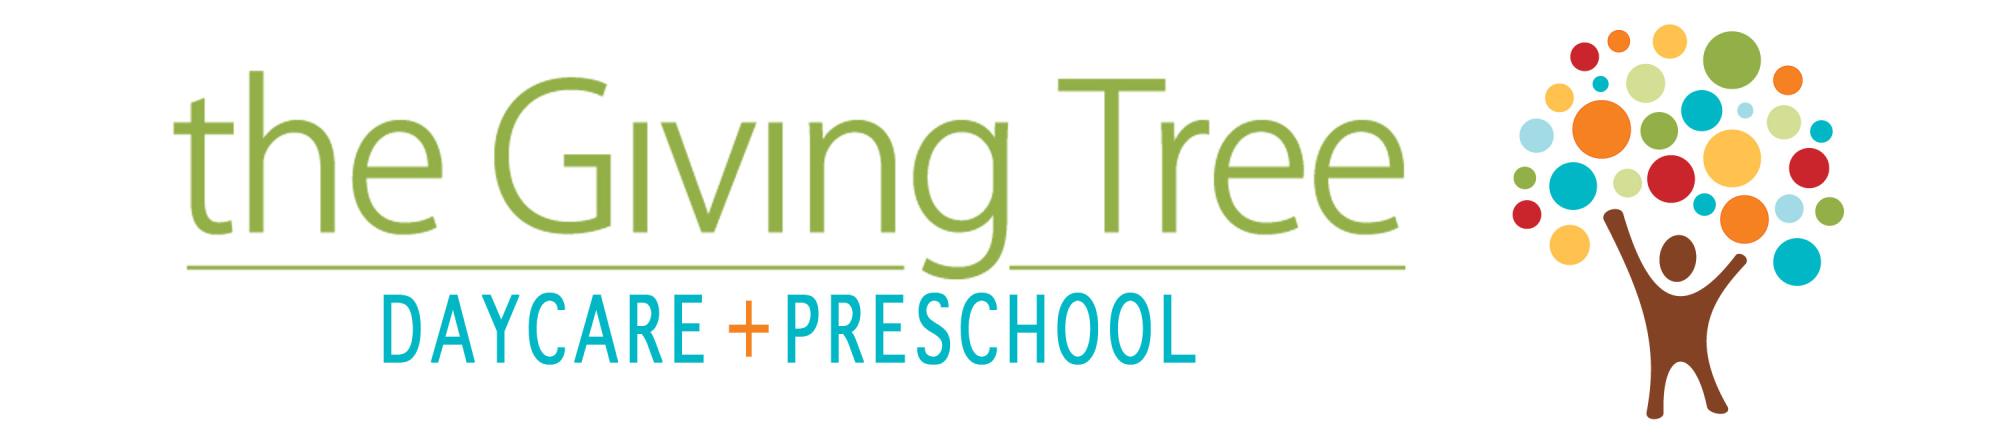 The Giving Tree Daycare and Preschool